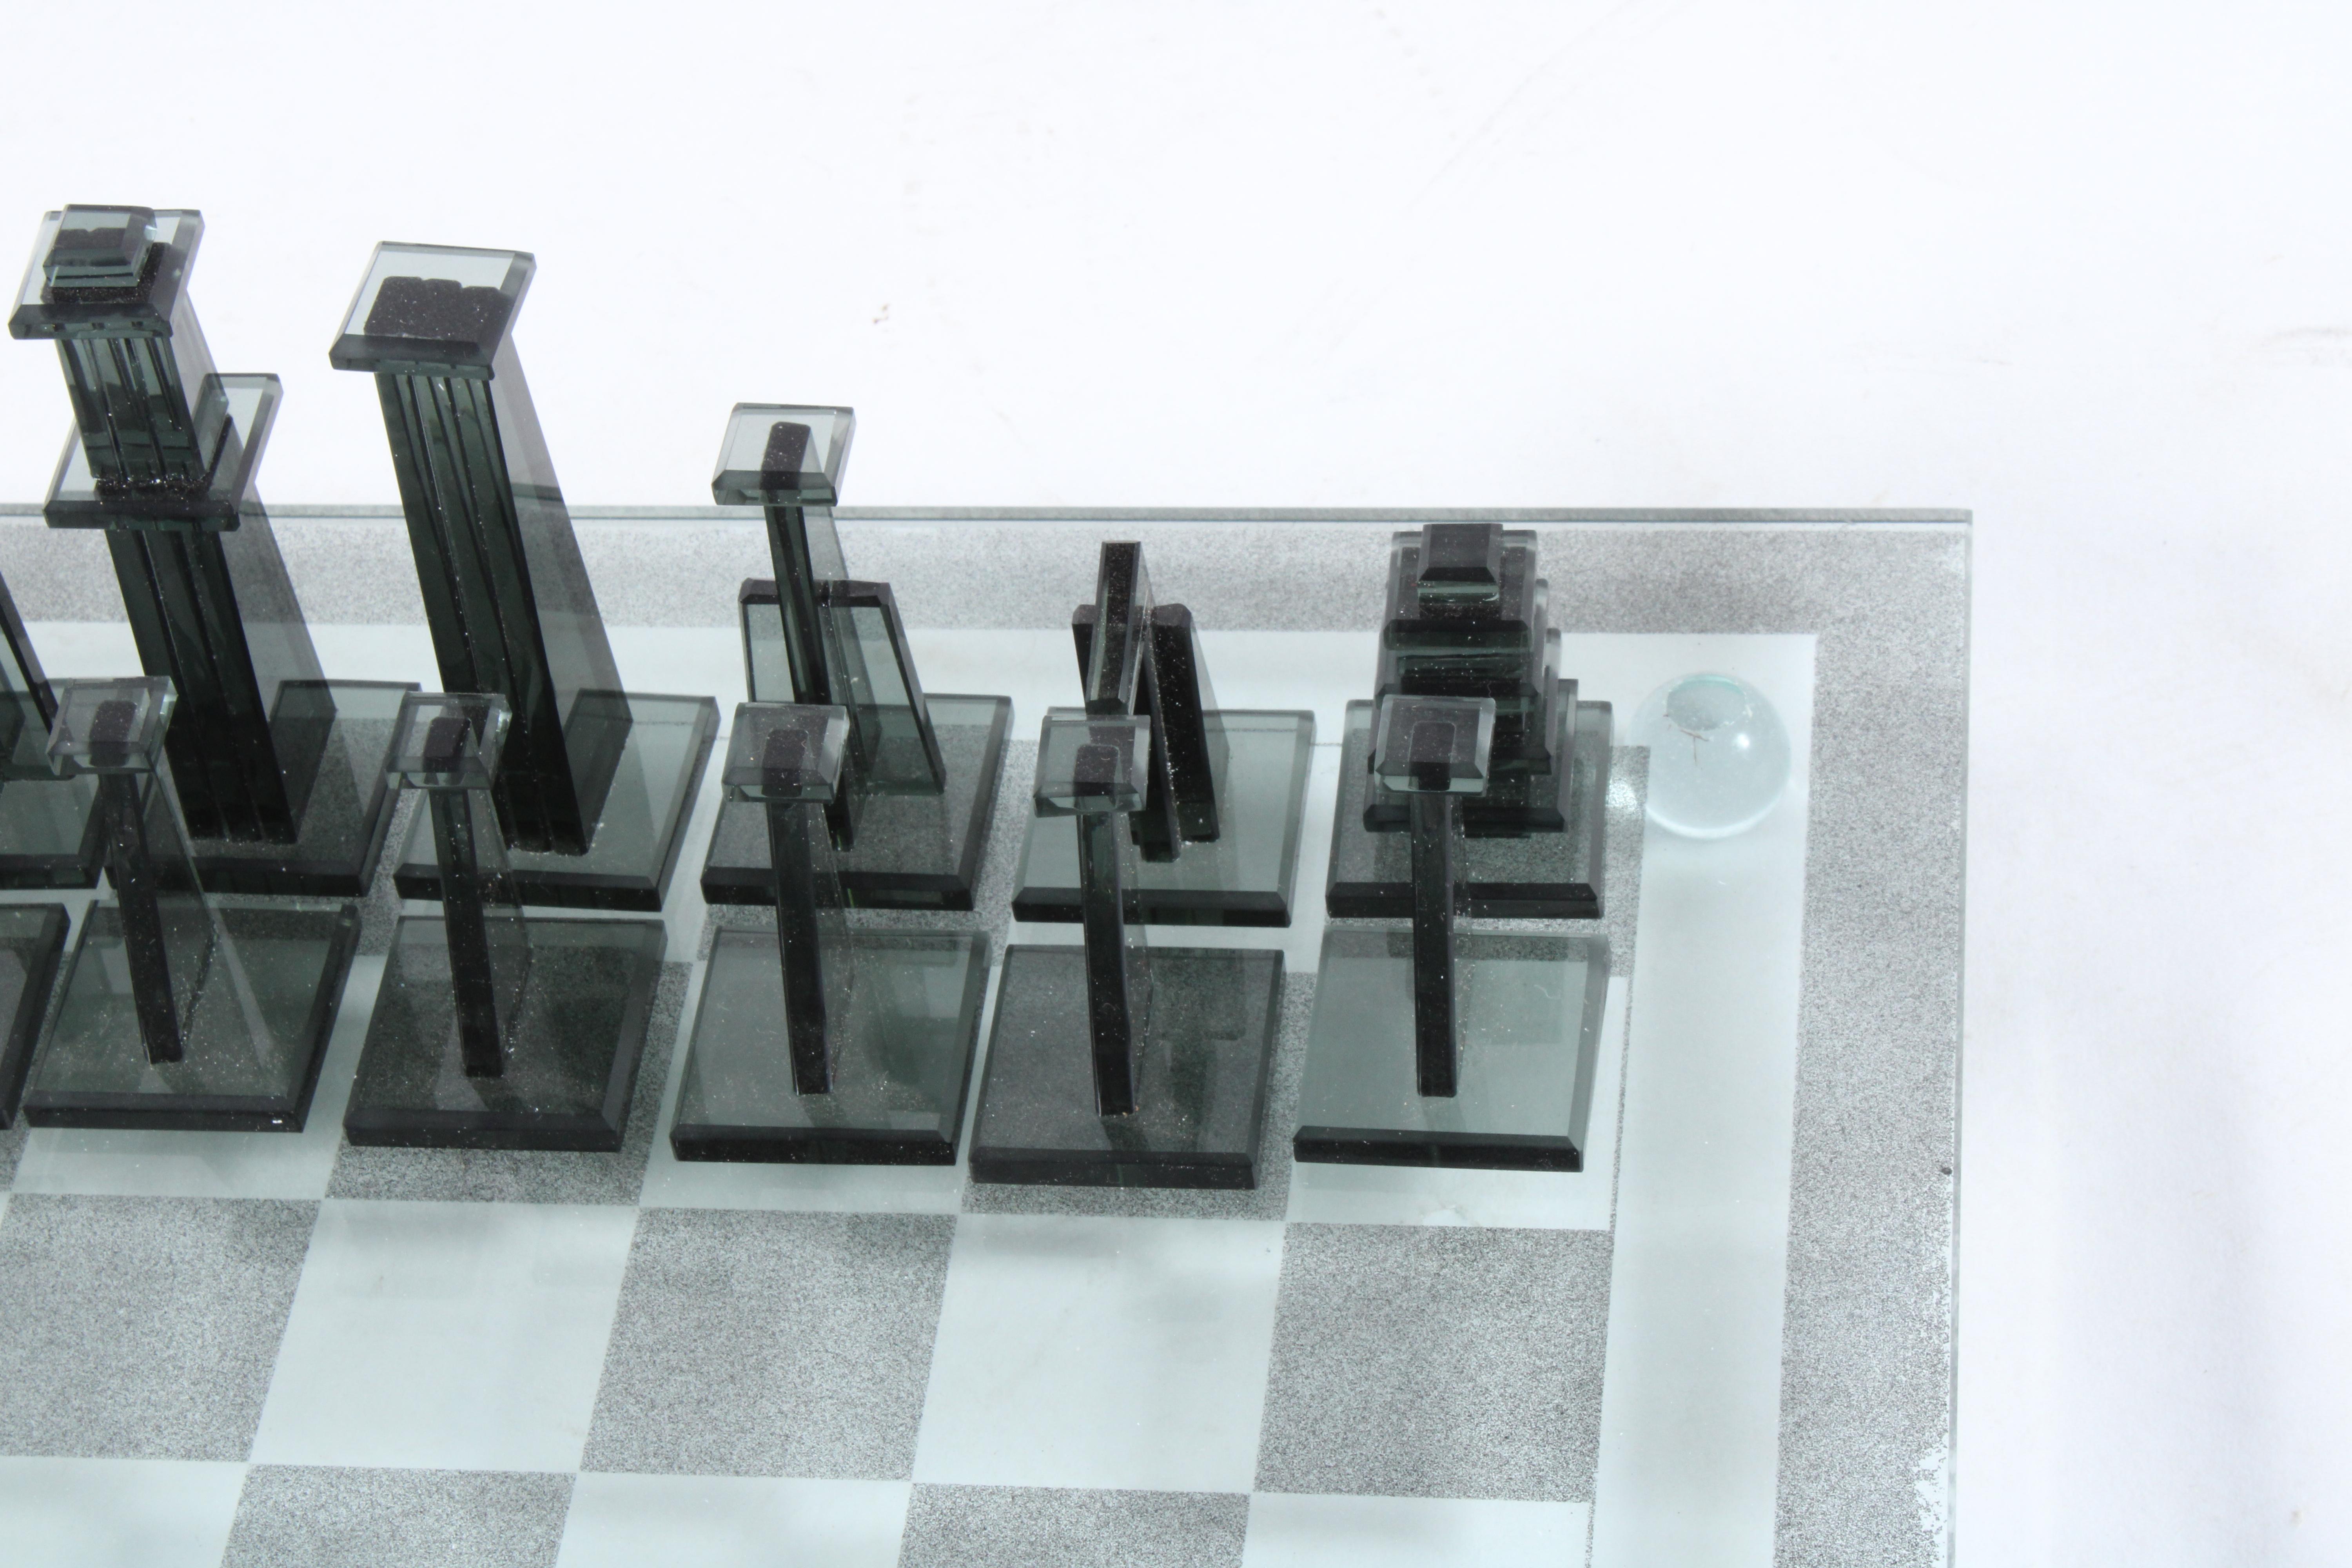 Late 20th Century Bespoke Vintage Artisan Glass Chess Set with board and pieces  *Free Shipping